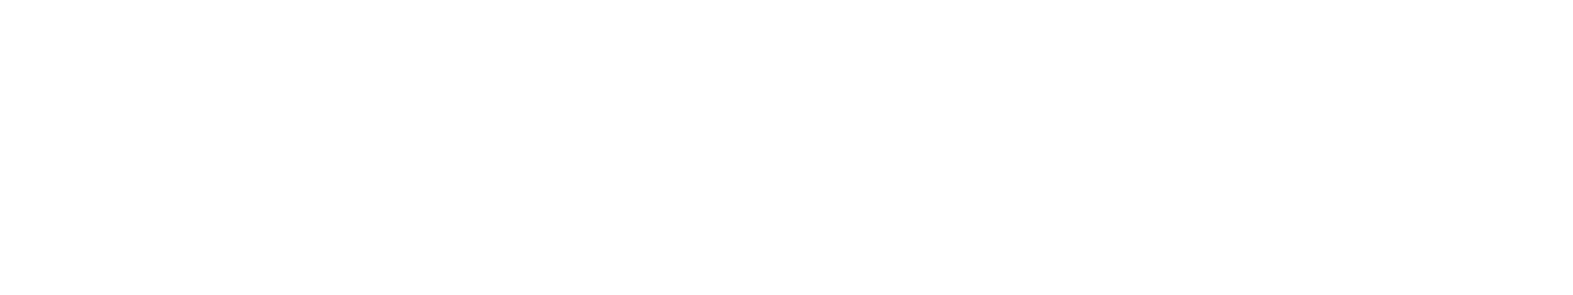 Americas Gold and Silver Corp logo large for dark backgrounds (transparent PNG)